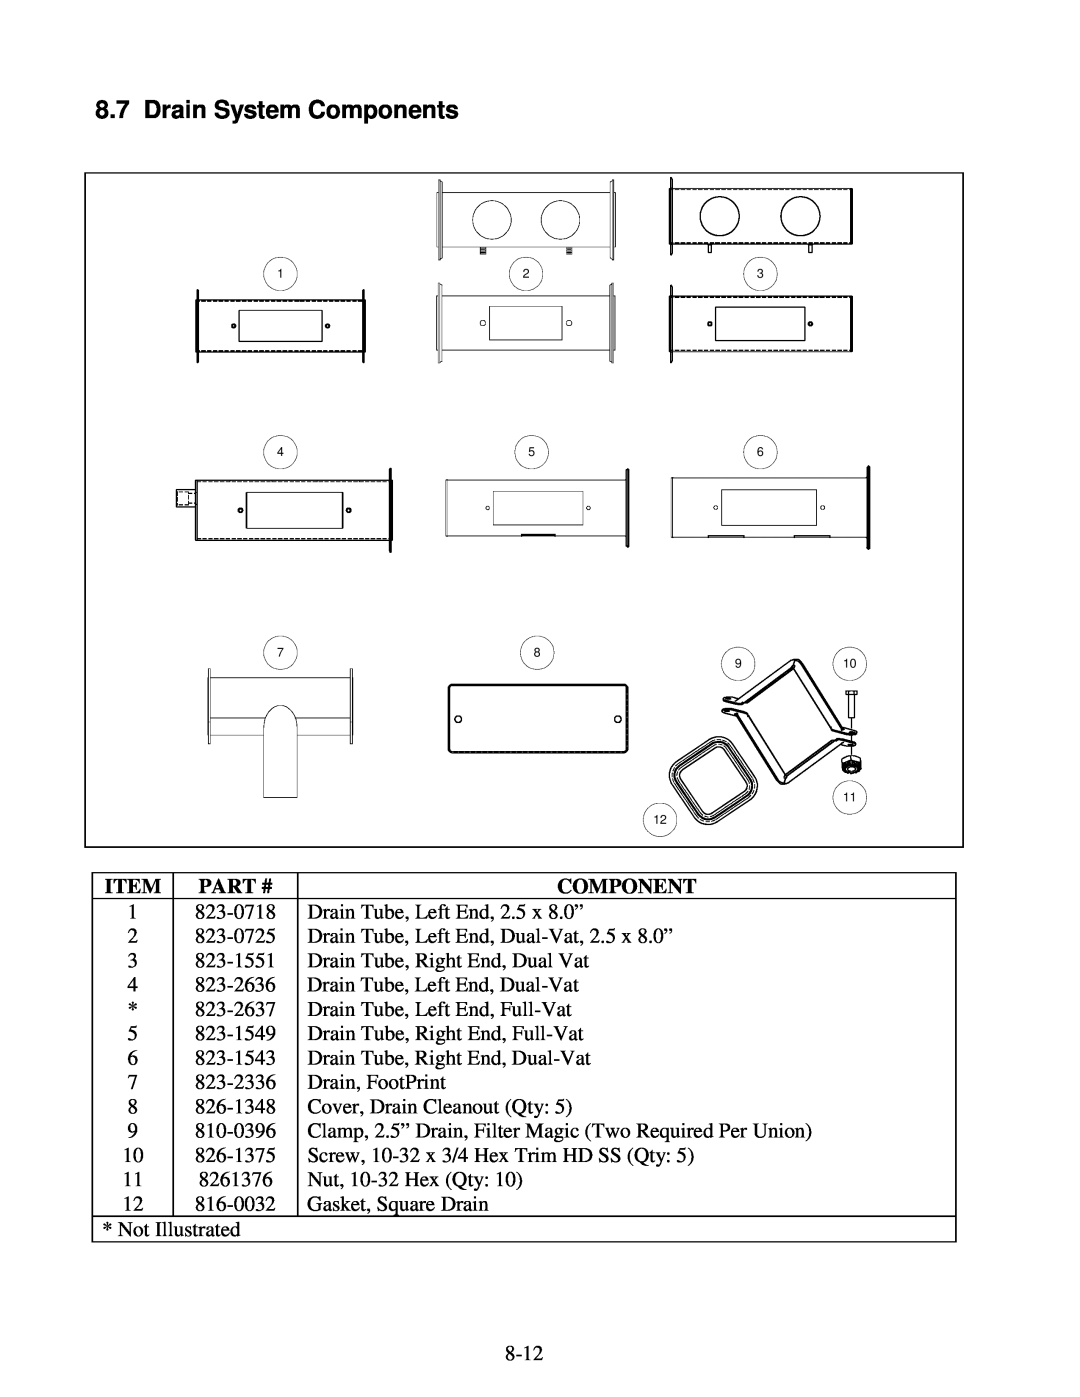 Frymaster H14 Series service manual Drain System Components, Part # 